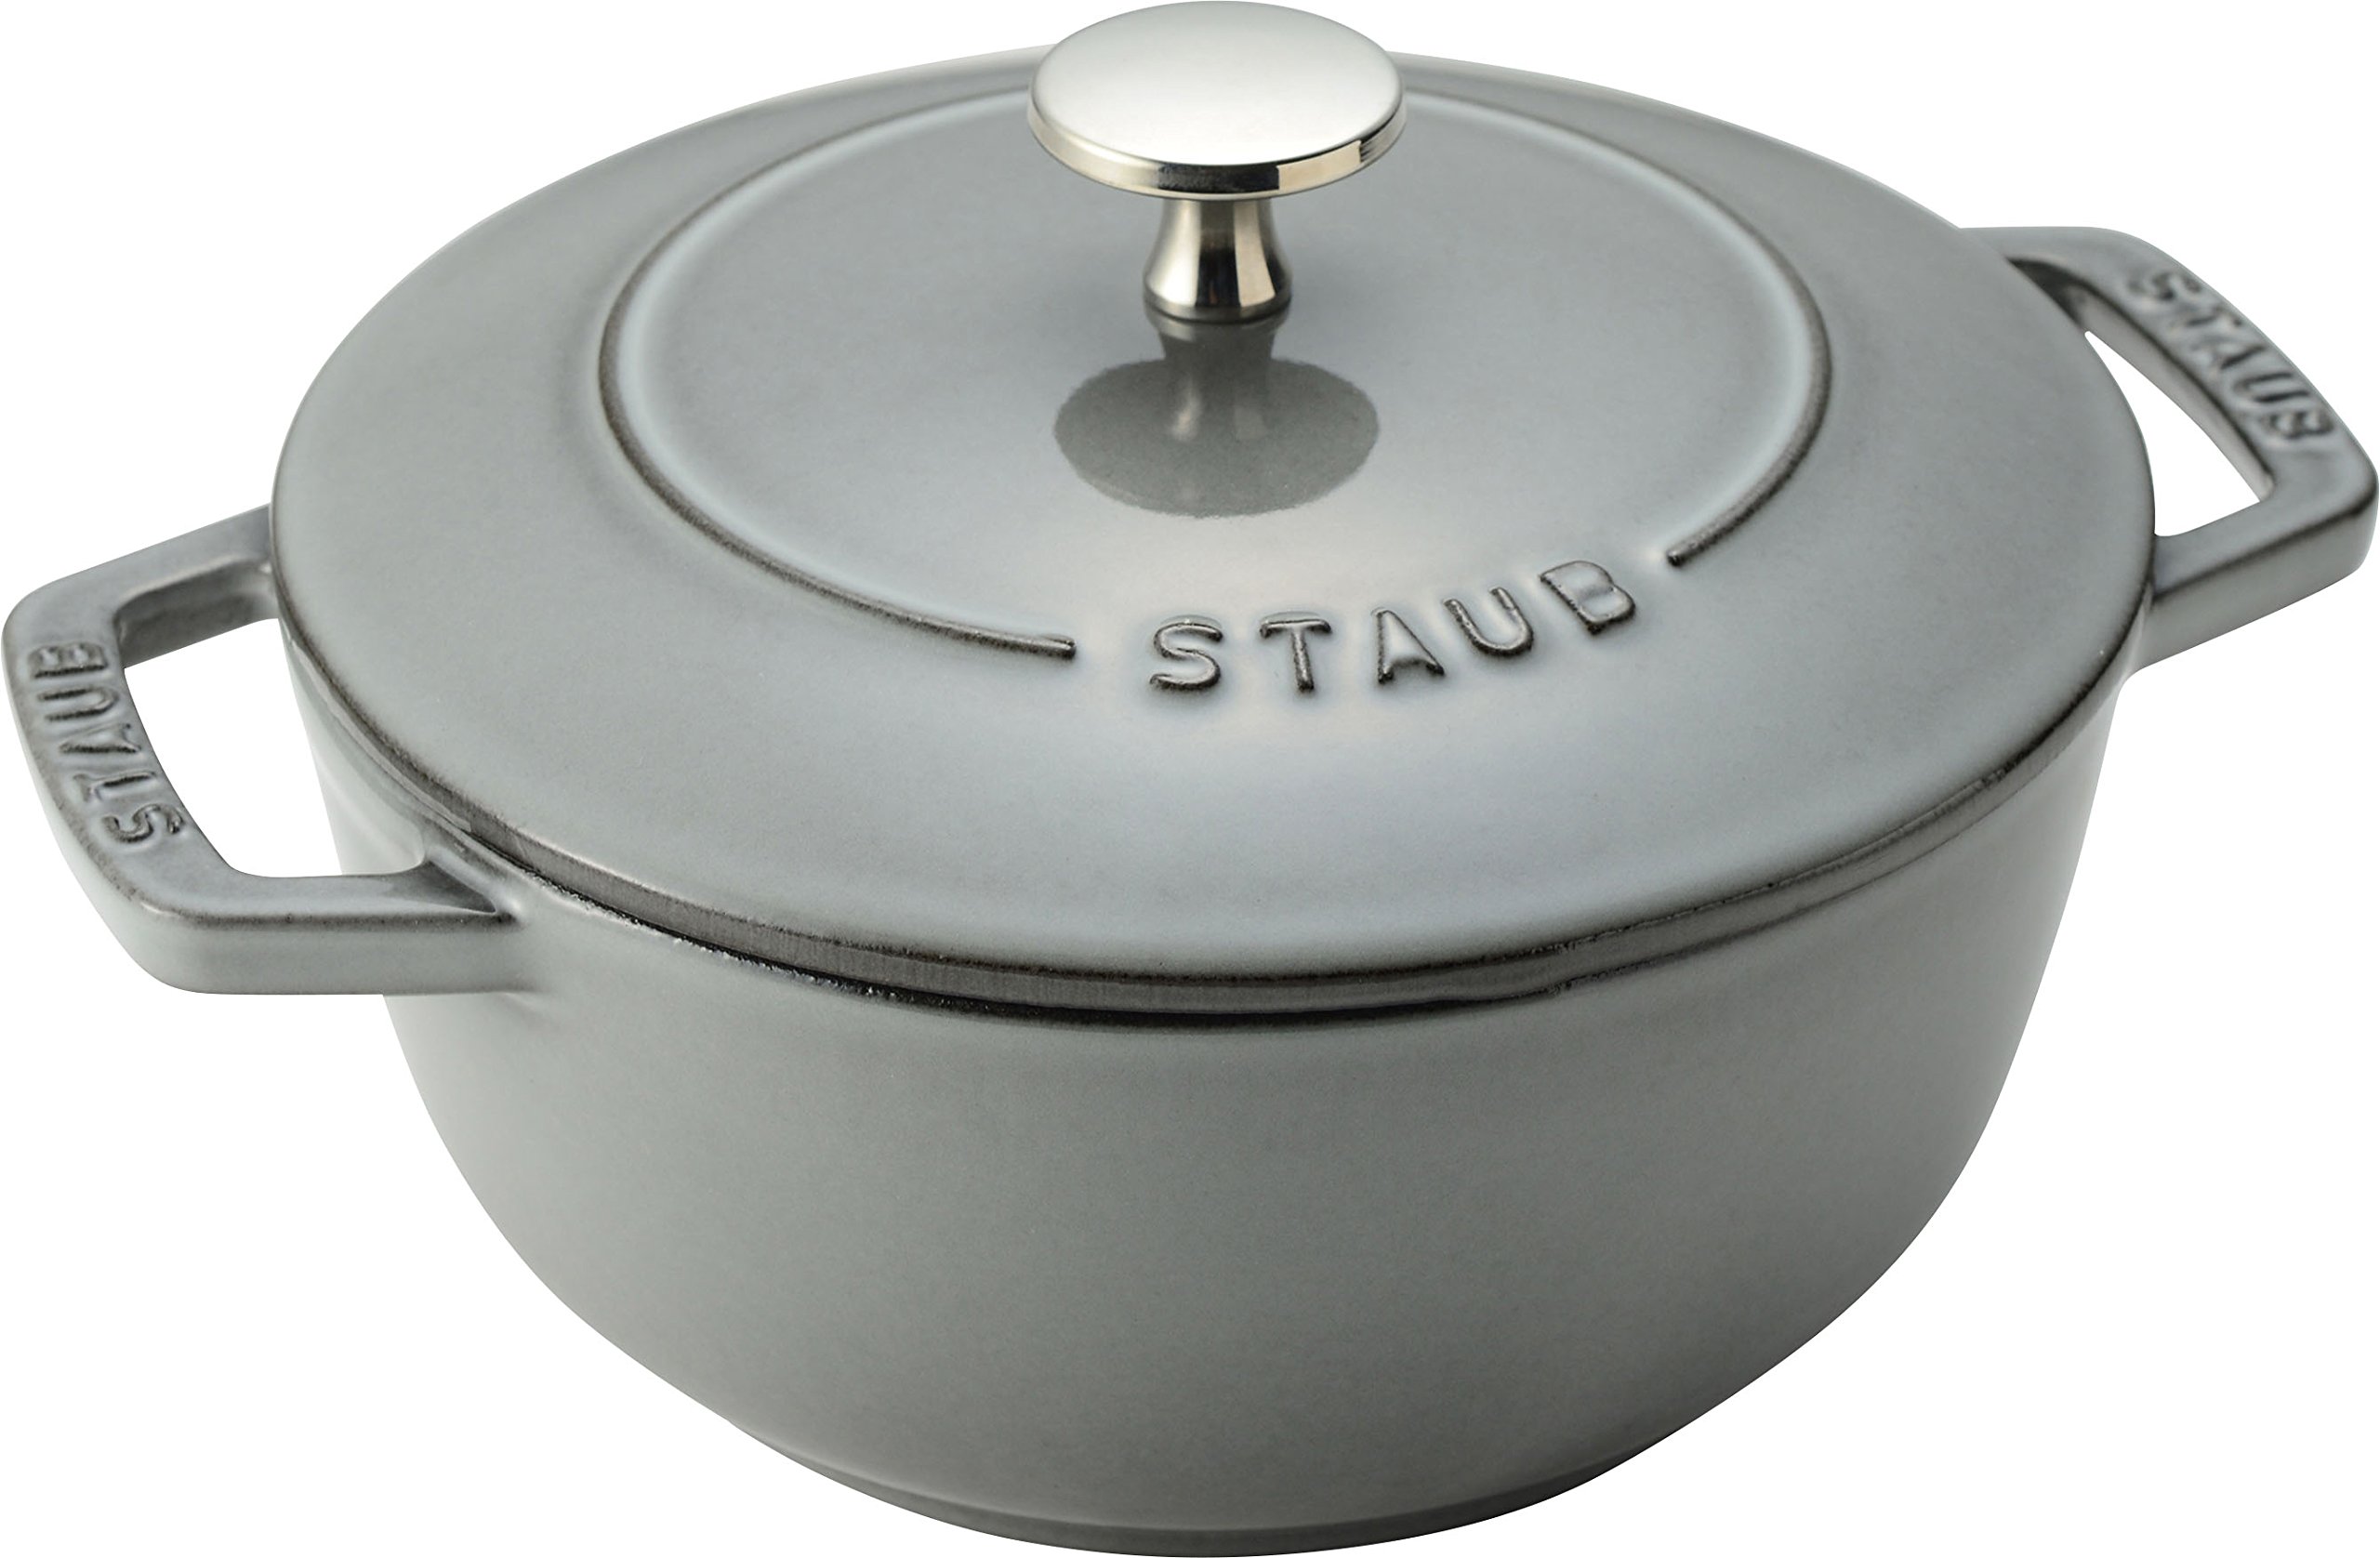 Staub Wa-NABE 40501-006 Wanabe, Gray, M, 7.1 inches (18 cm), Double Handed, Cast Enamel, Pot, Rice Cooking, 2 Cups, Induction Compatible, Japanese Authorized Product